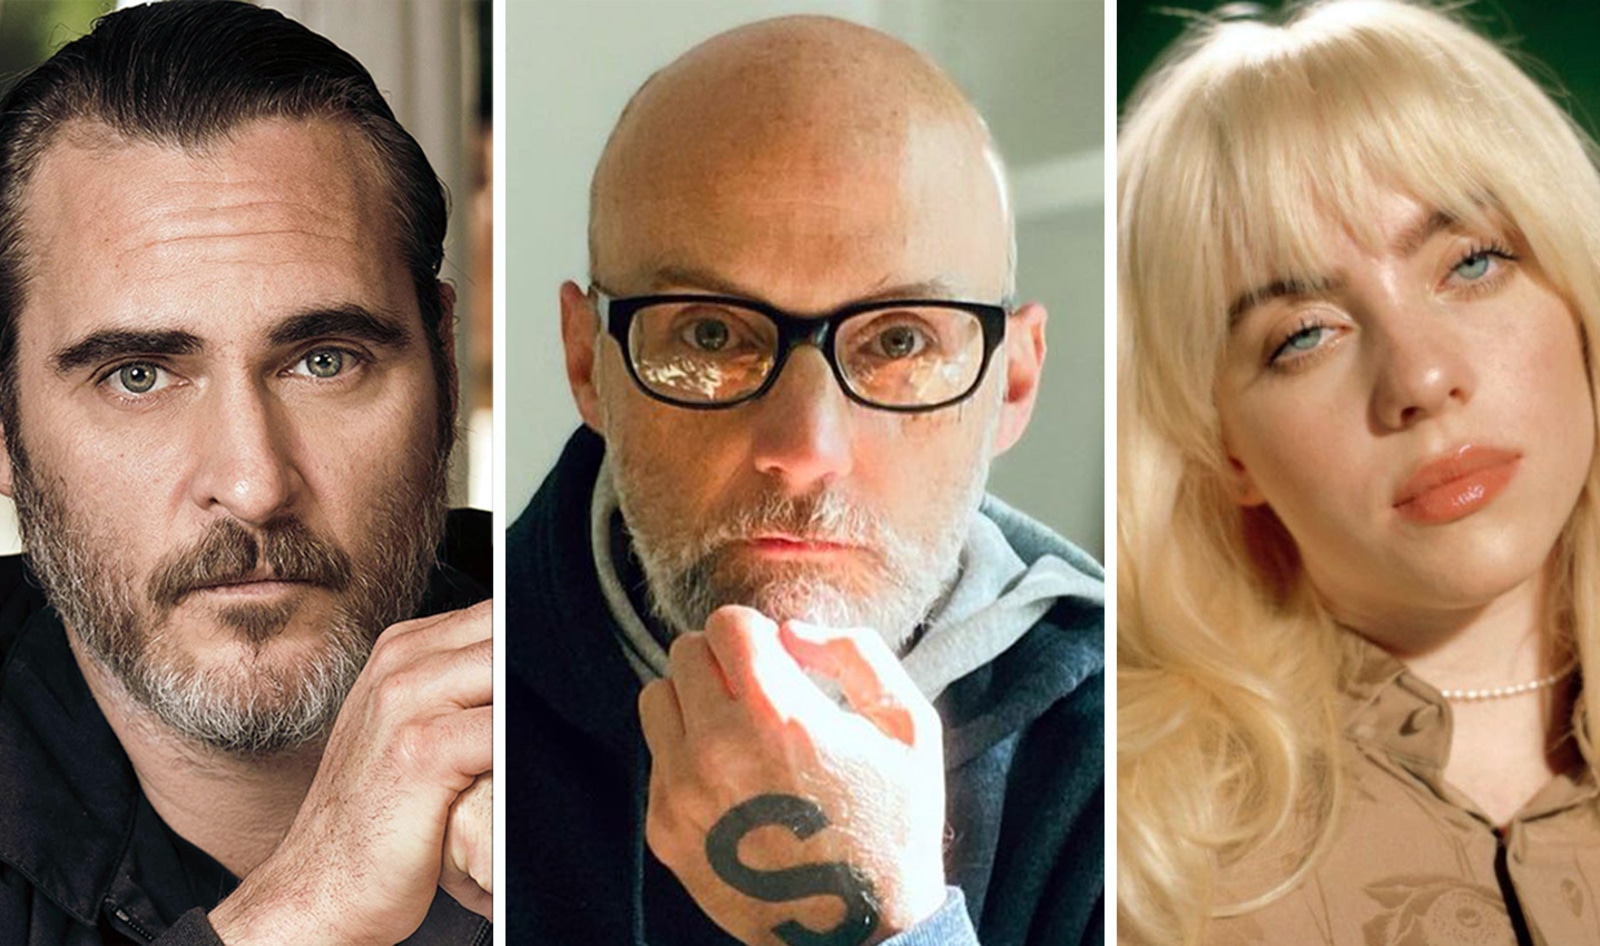 Billie Eilish, Moby, and Joaquin Phoenix Demand COP26 Stop Ignoring Animal Agriculture's Role in Climate Crisis